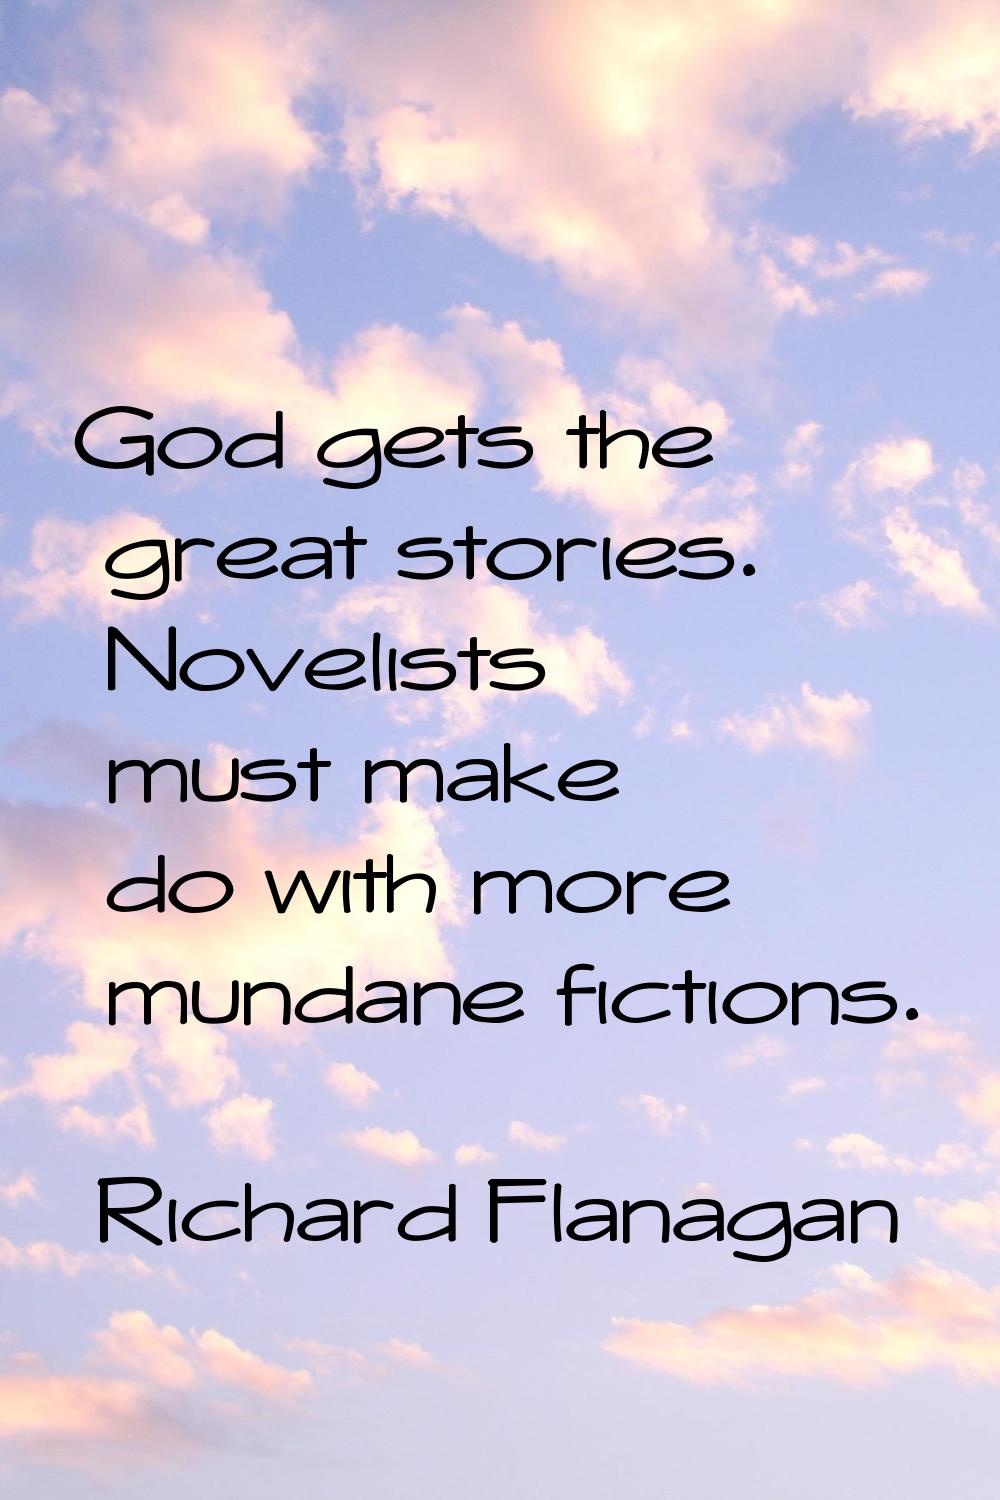 God gets the great stories. Novelists must make do with more mundane fictions.